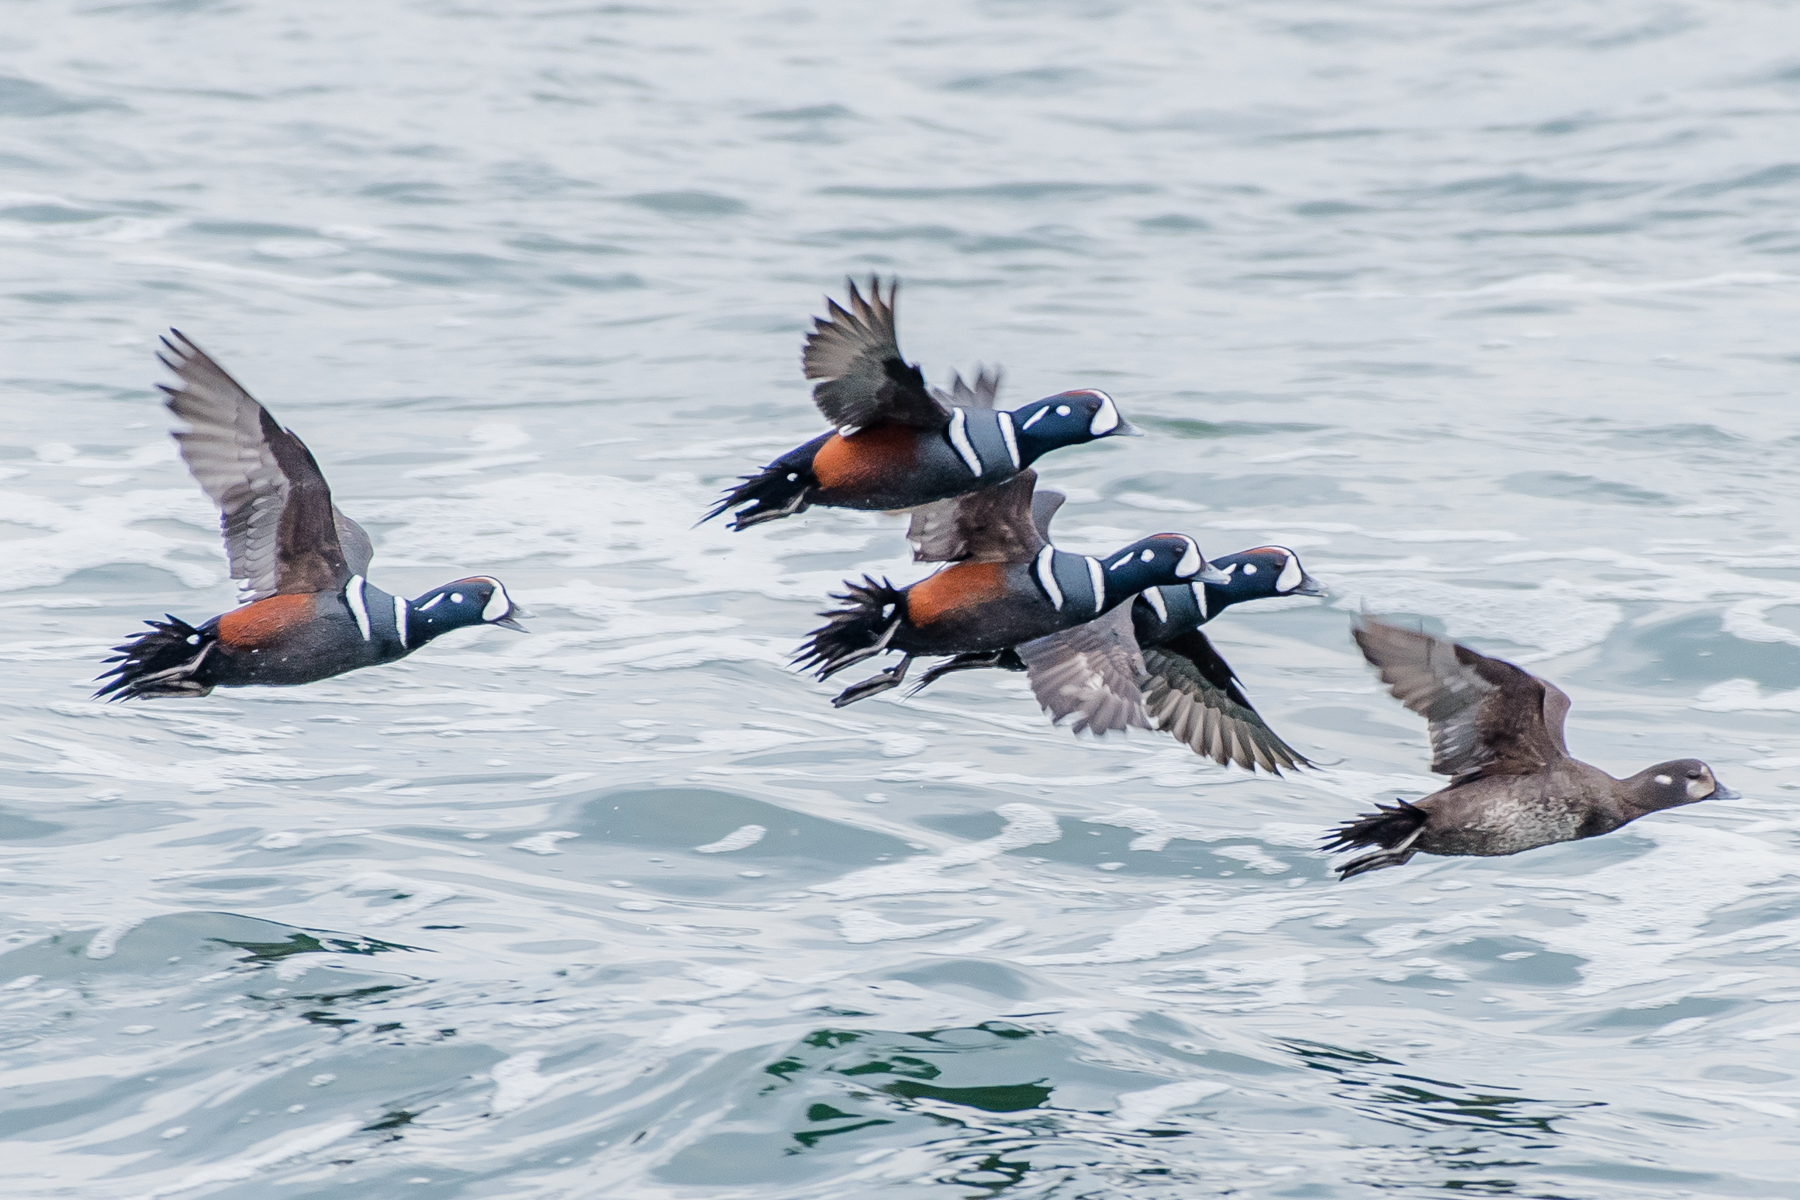   Harlequin ducks. &nbsp;These little speedsters come down from the great white north to spend the winters along the New England coast. &nbsp;This was taken in Ogunquit Maine today, &nbsp;3/7/16. &nbsp;You gotta love these little beauties. Four males